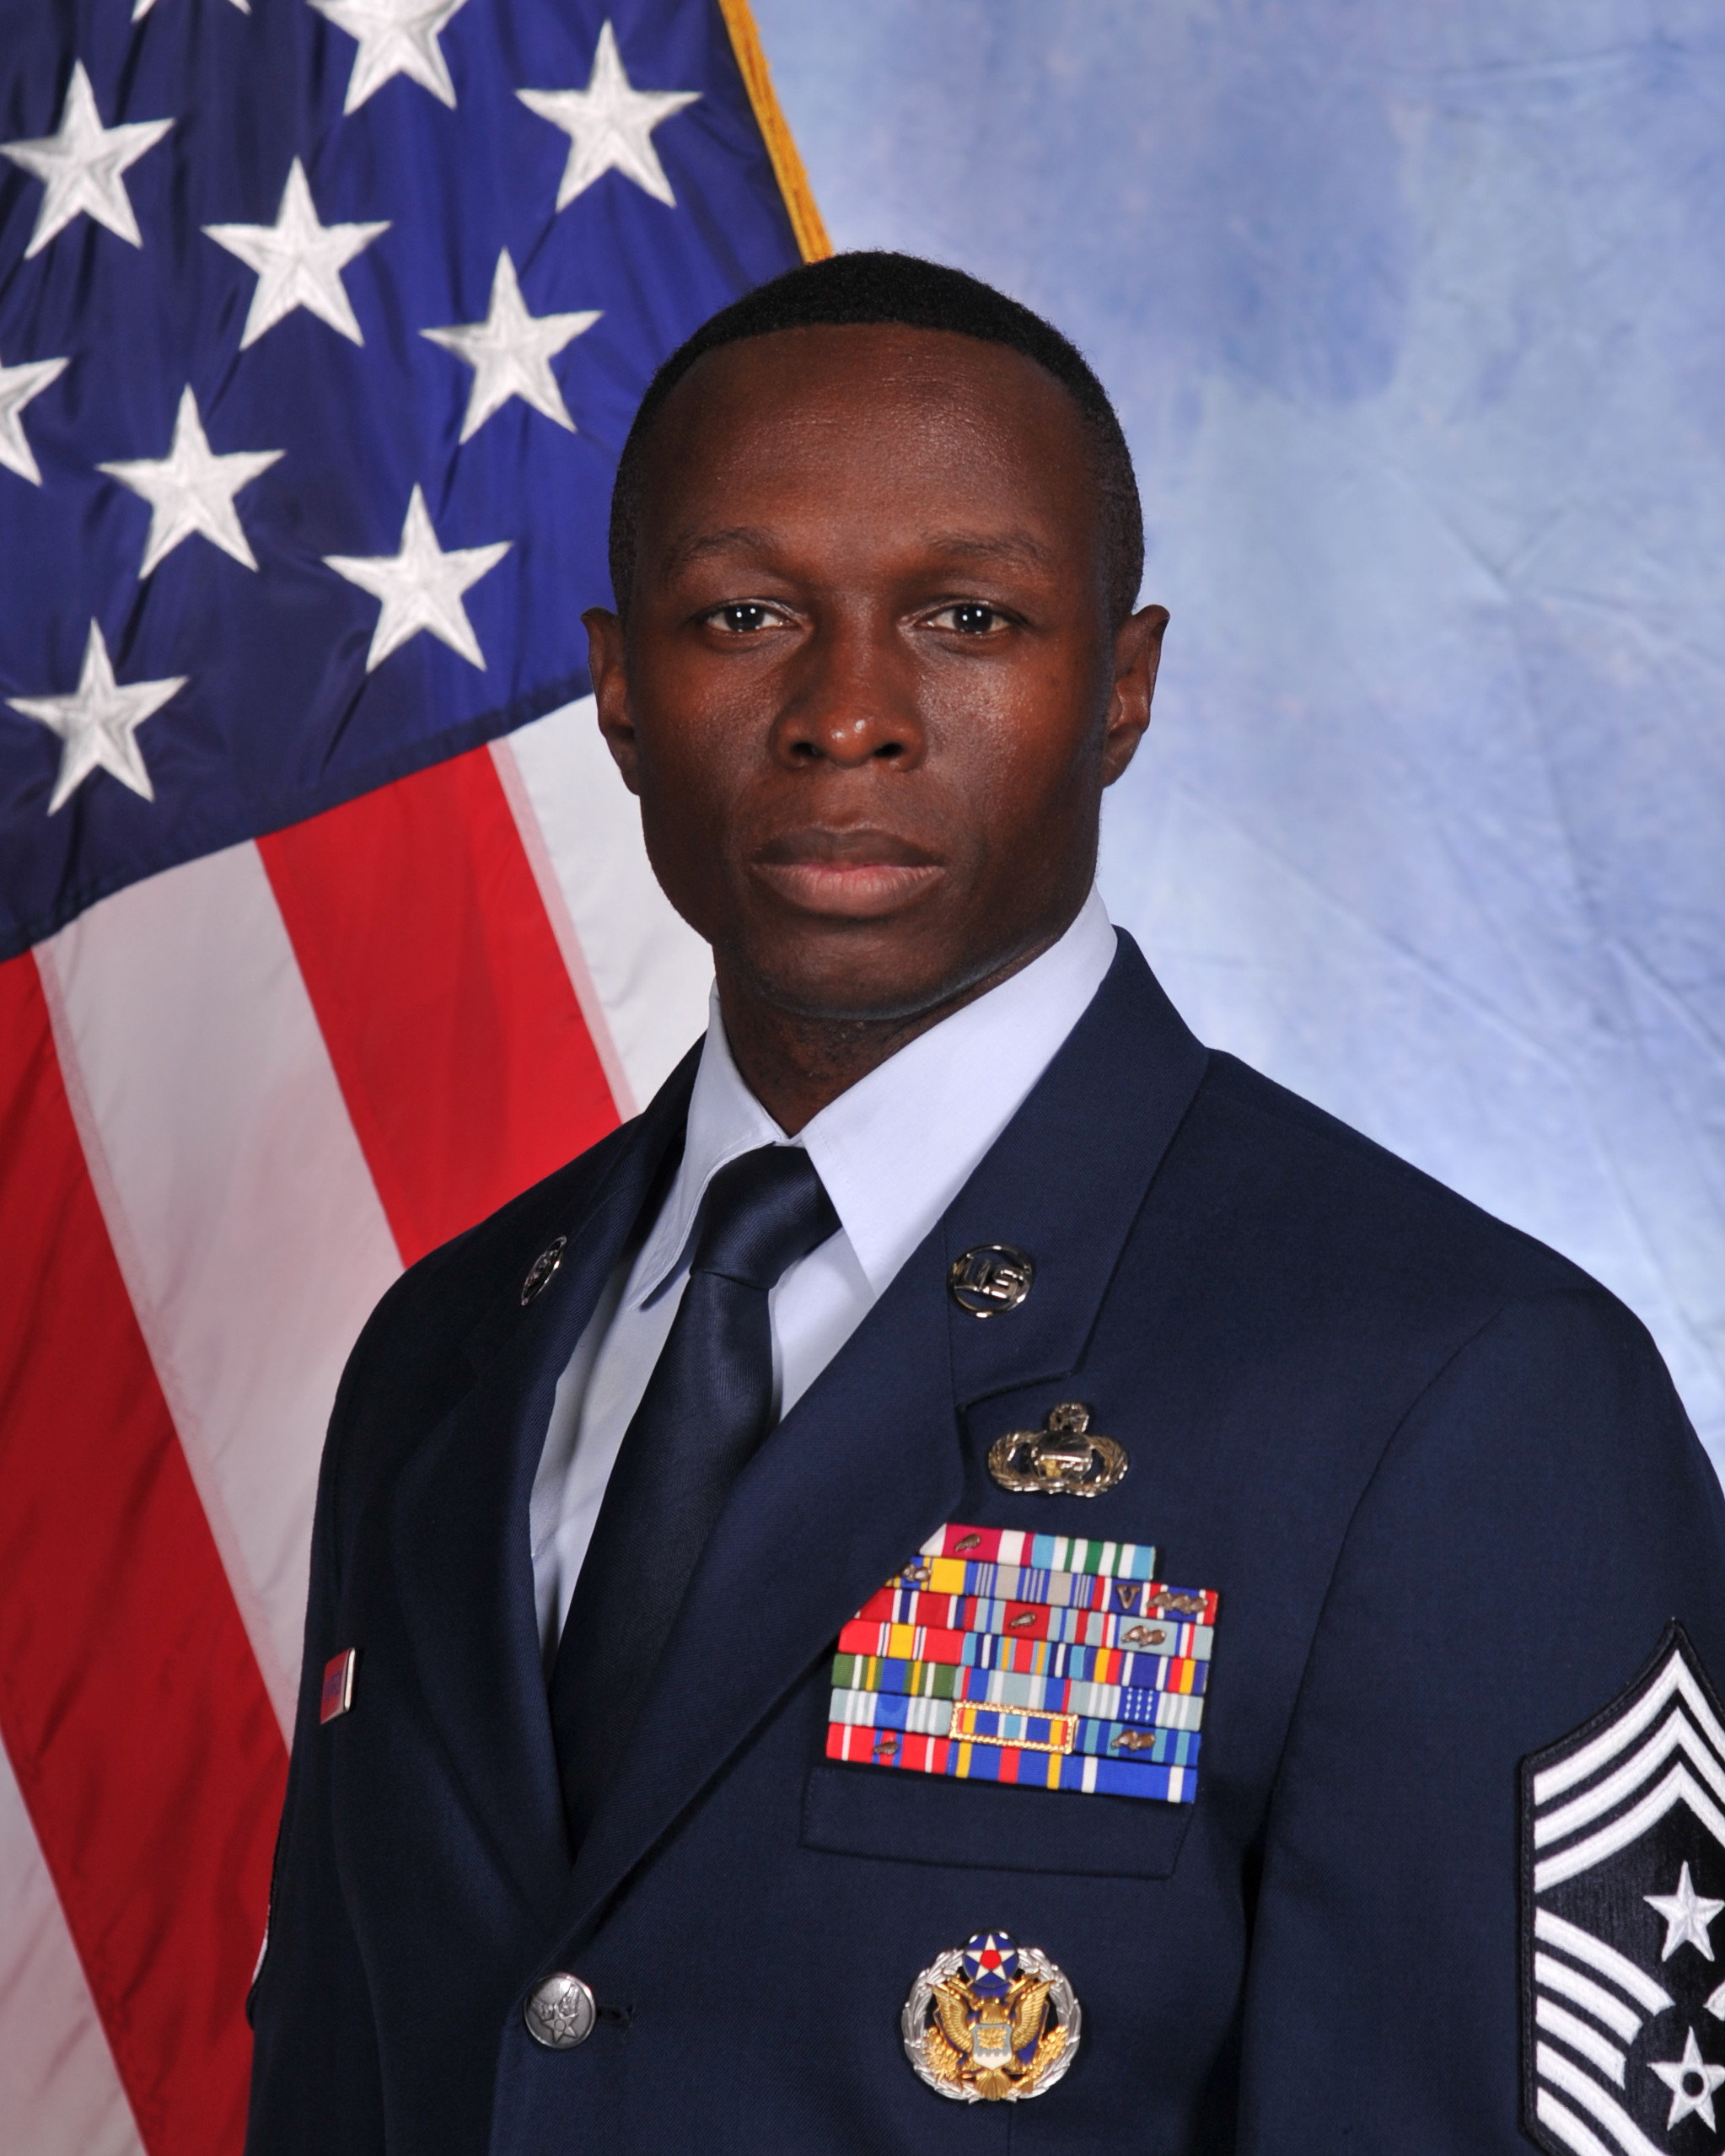 Albums 103+ Pictures What Is A Master Sergeant In The Army Full HD, 2k